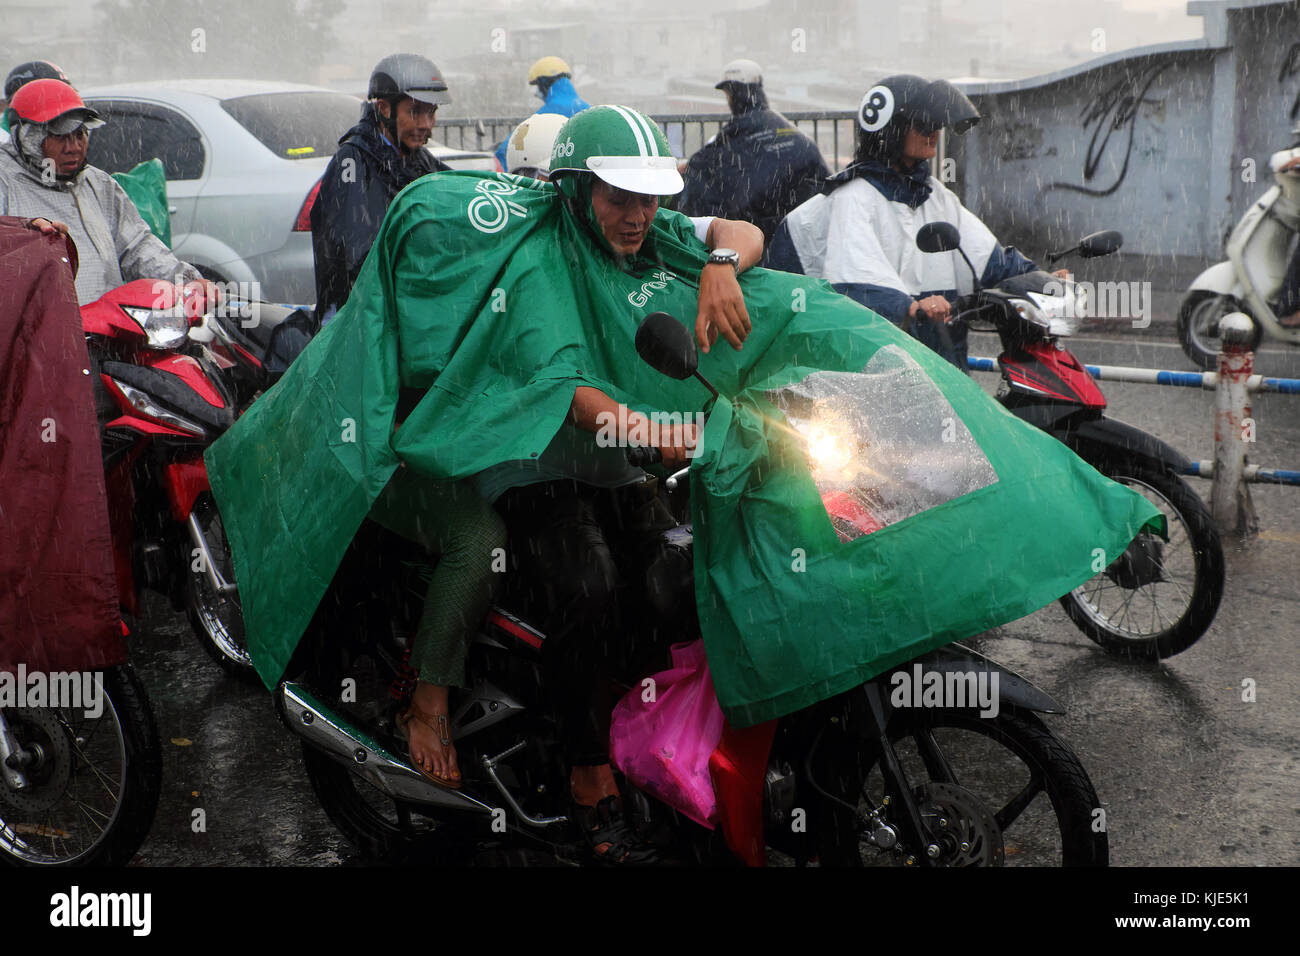 HO CHI MINH CITY, VIET NAM, Group of Asian people wear raincoat ride motorbike, difficult move in heavy rain, high wind from bad weather Stock Photo